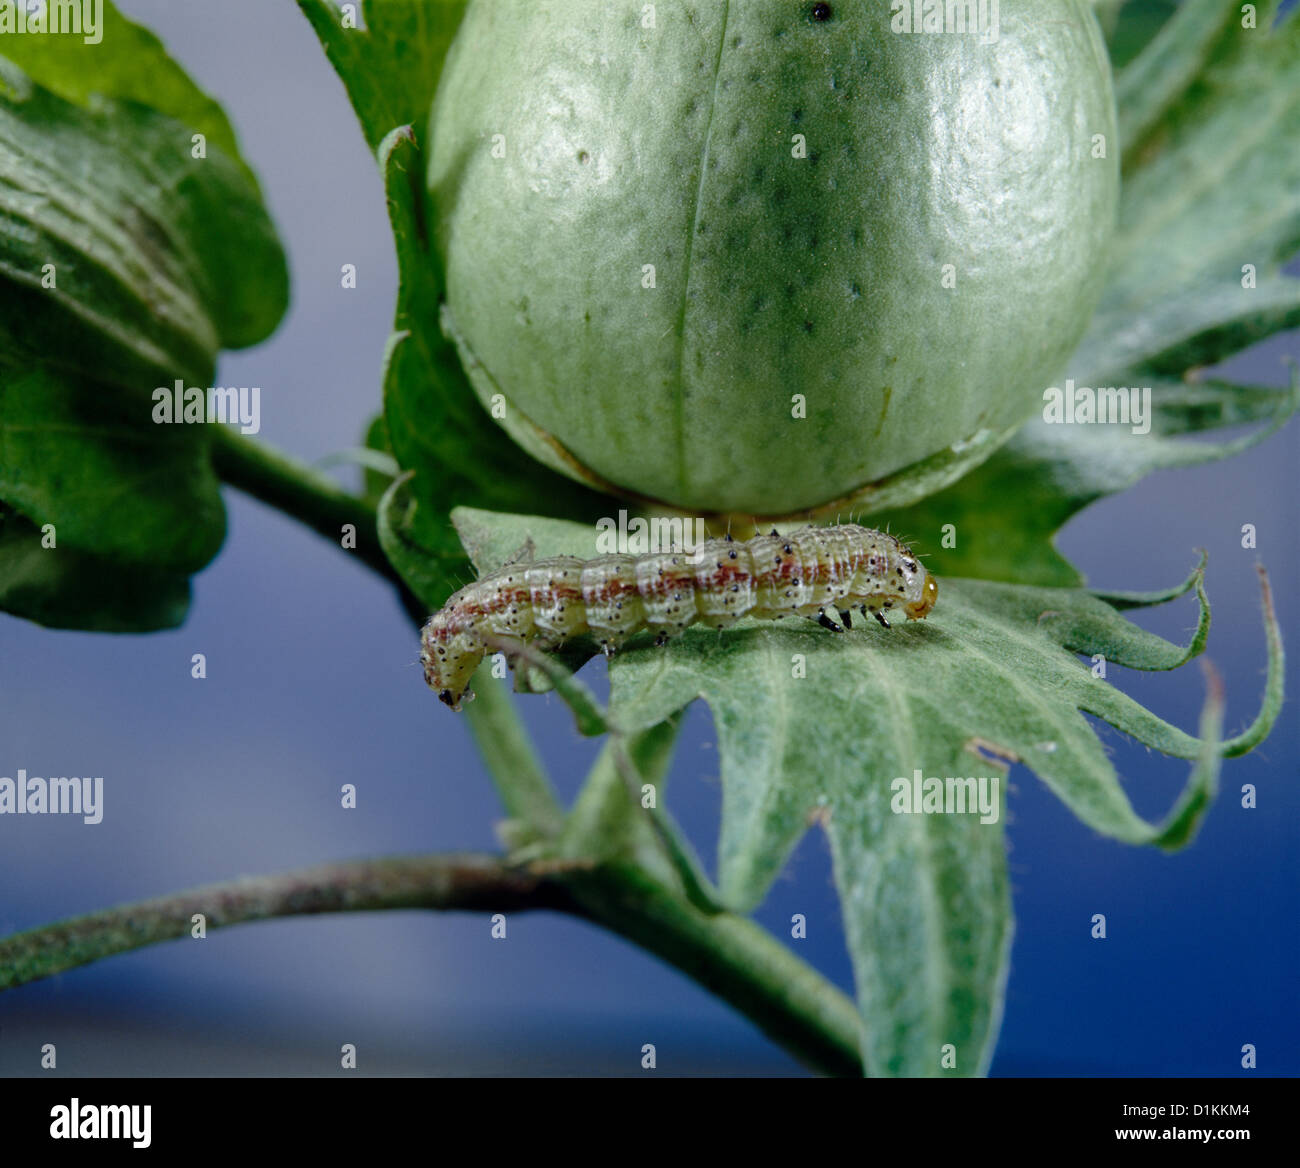 TOBACCO BUDWORM, CORN EARWORM, TOMATO FRUITWORM, COTTON BOLLWORM OR SOYBEAN PODWORM (HELIOTHIS VIRESCENS) LARVA ON COTTON LEAF Stock Photo